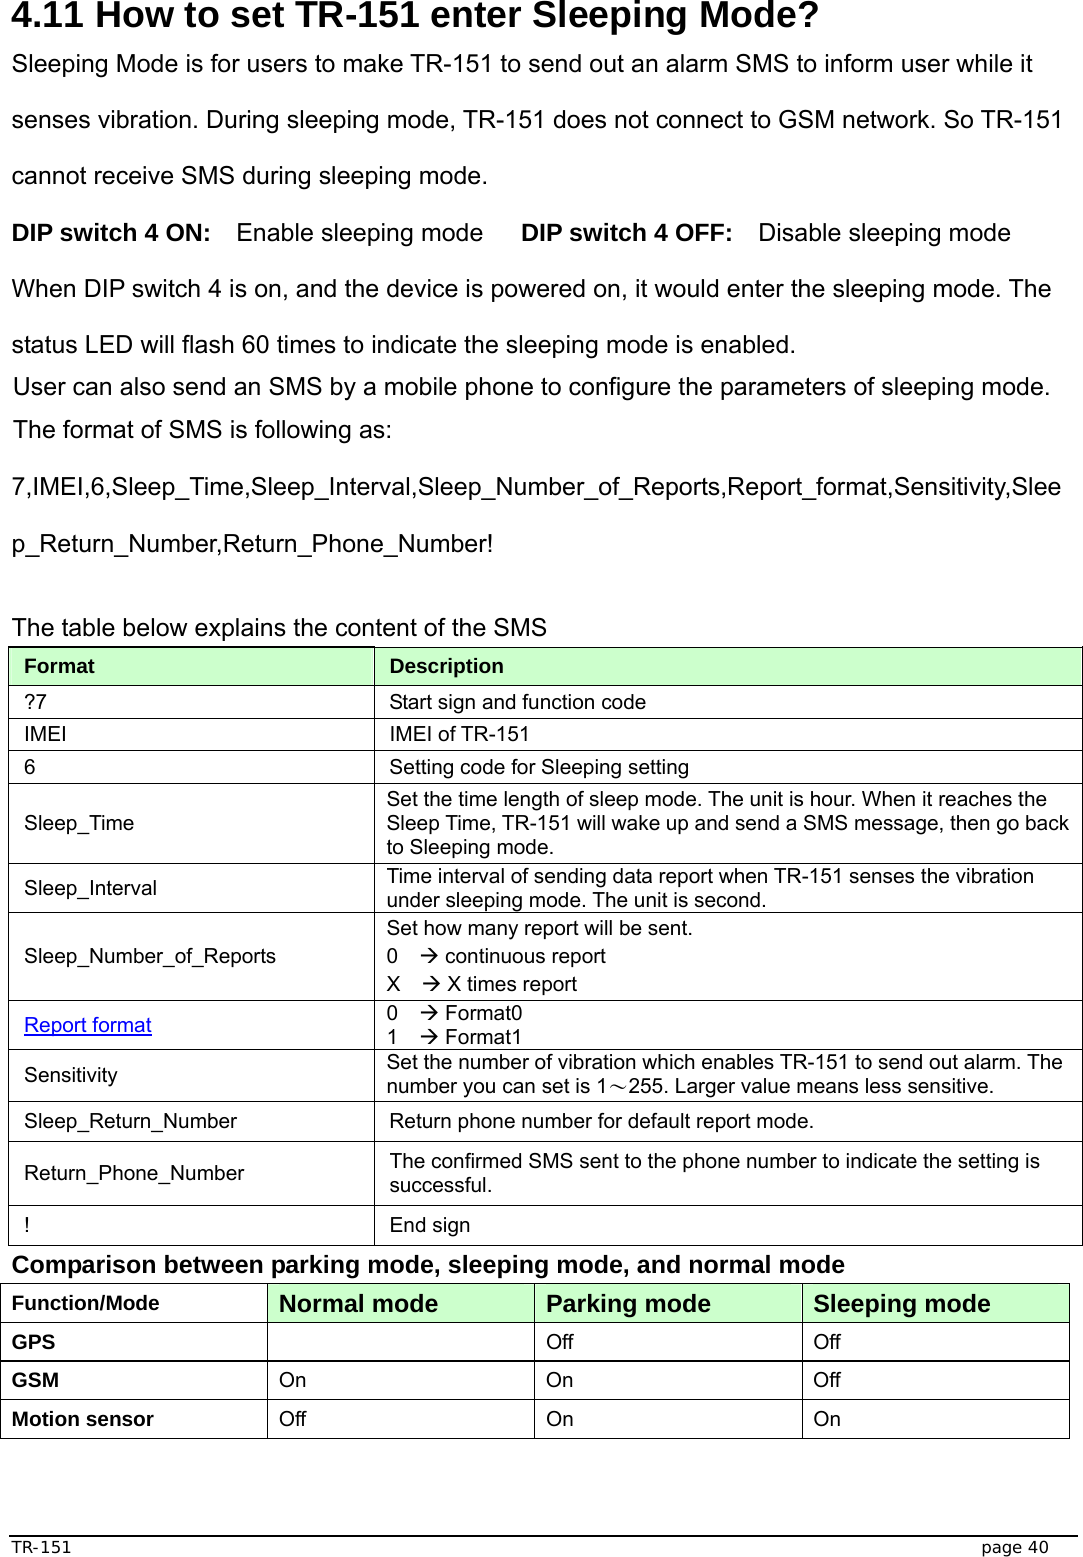  TR-151   page 40 4.11 How to set TR-151 enter Sleeping Mode? Sleeping Mode is for users to make TR-151 to send out an alarm SMS to inform user while it senses vibration. During sleeping mode, TR-151 does not connect to GSM network. So TR-151 cannot receive SMS during sleeping mode. DIP switch 4 ON:  Enable sleeping mode   DIP switch 4 OFF:    Disable sleeping mode When DIP switch 4 is on, and the device is powered on, it would enter the sleeping mode. The status LED will flash 60 times to indicate the sleeping mode is enabled. User can also send an SMS by a mobile phone to configure the parameters of sleeping mode. The format of SMS is following as: 7,IMEI,6,Sleep_Time,Sleep_Interval,Sleep_Number_of_Reports,Report_format,Sensitivity,Sleep_Return_Number,Return_Phone_Number!  The table below explains the content of the SMS Format  Description ?7  Start sign and function code IMEI IMEI of TR-151 6  Setting code for Sleeping setting Sleep_Time Set the time length of sleep mode. The unit is hour. When it reaches the Sleep Time, TR-151 will wake up and send a SMS message, then go back to Sleeping mode.   Sleep_Interval  Time interval of sending data report when TR-151 senses the vibration under sleeping mode. The unit is second. Sleep_Number_of_Reports Set how many report will be sent. 0  Æ continuous report X  Æ X times report Report format 0  Æ Format0 1  Æ Format1 Sensitivity  Set the number of vibration which enables TR-151 to send out alarm. The number you can set is 1～255. Larger value means less sensitive.   Sleep_Return_Number  Return phone number for default report mode. Return_Phone_Number  The confirmed SMS sent to the phone number to indicate the setting is successful. ! End sign Comparison between parking mode, sleeping mode, and normal mode Function/Mode  Normal mode  Parking mode  Sleeping mode GPS   Off Off GSM  On On Off Motion sensor  Off On On 